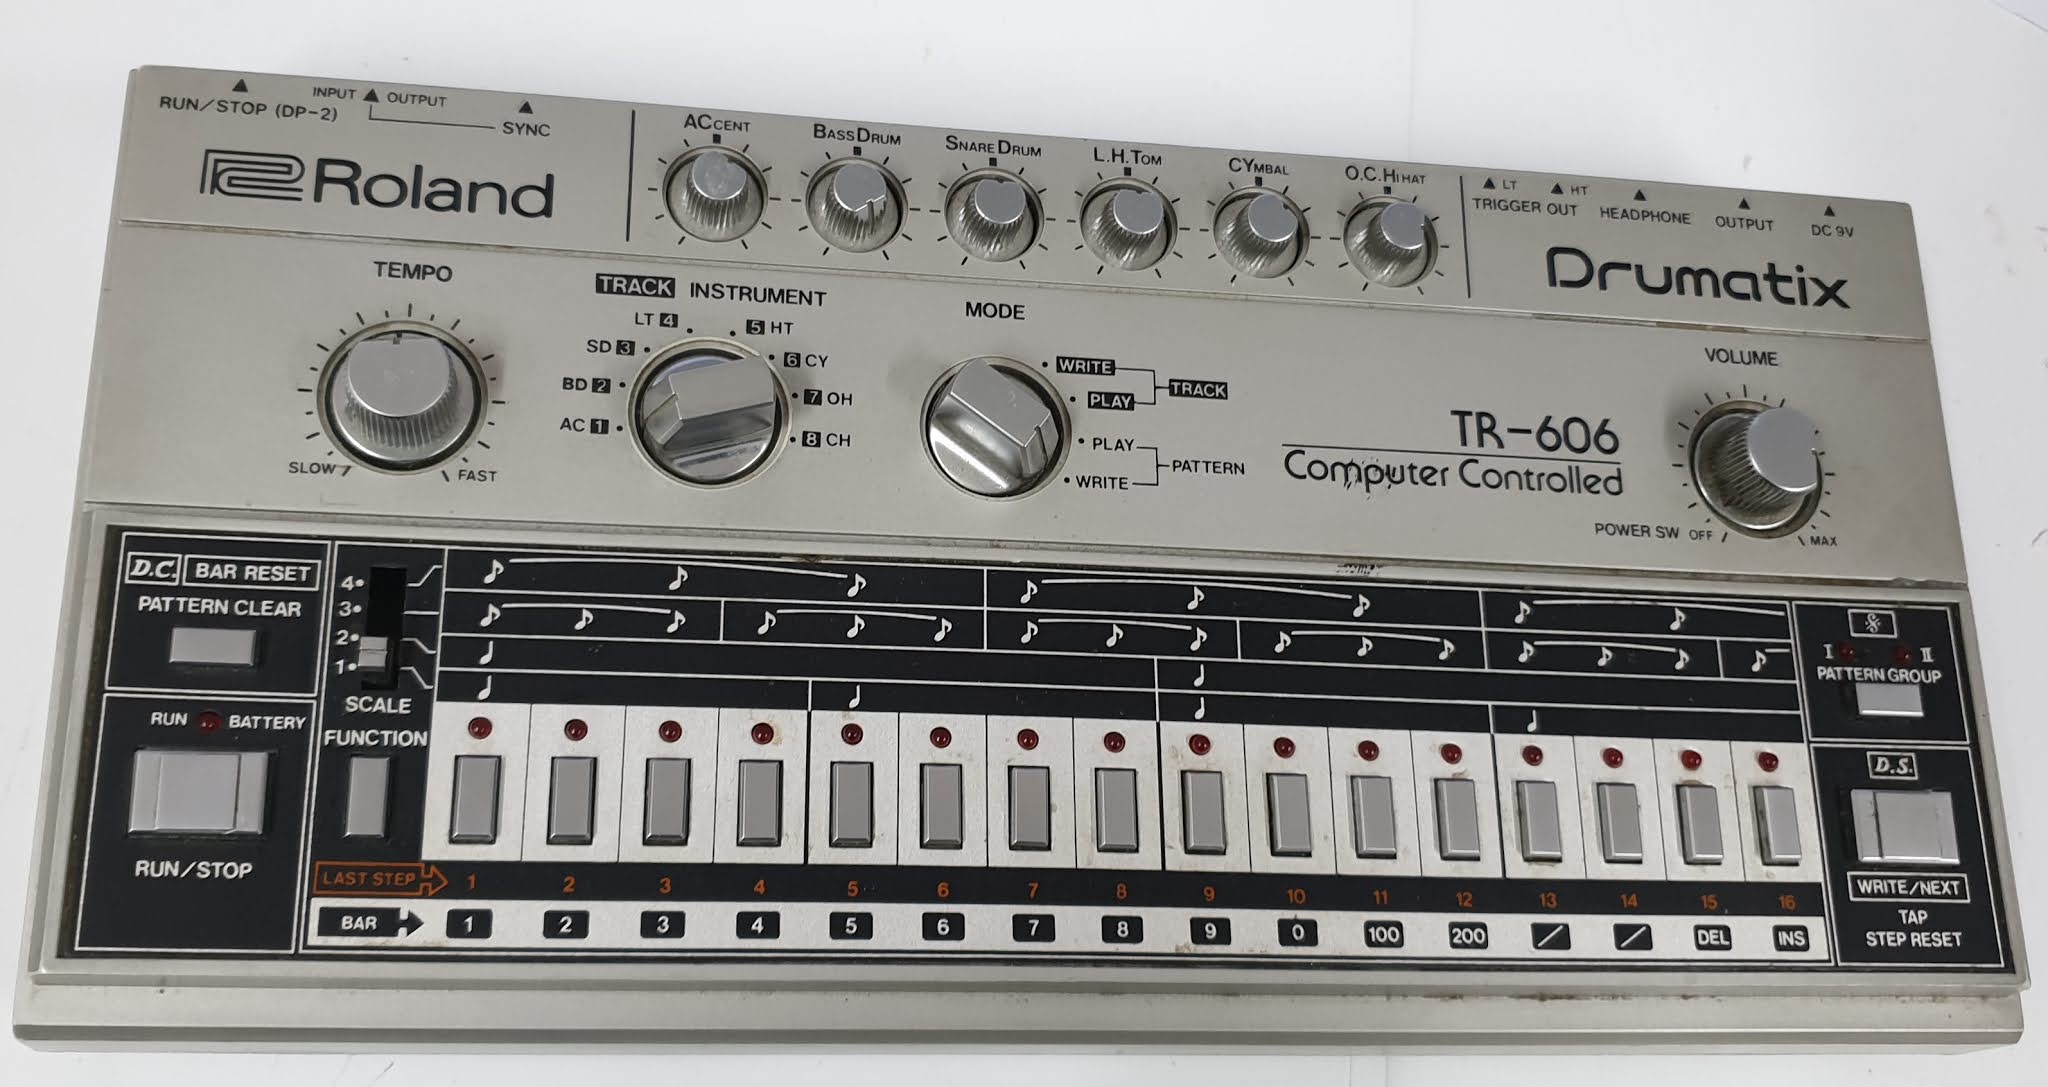 JonDent - Exploring Electronic Music: Roland TR 606 - tear down